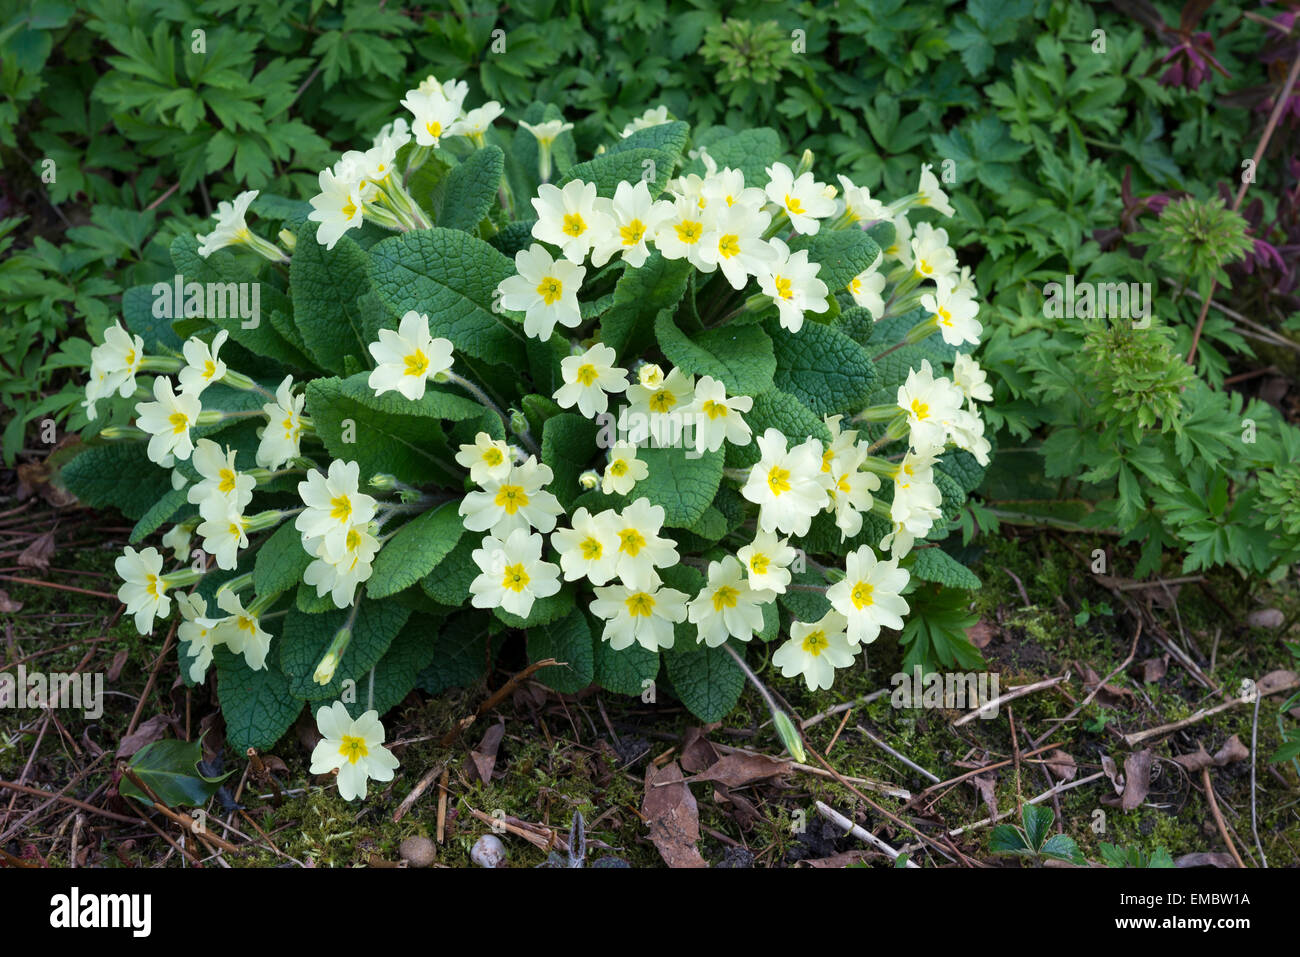 Clump of Primula Vulgaris (Wild Primrose) with pale creamy yellow flower in early spring. Stock Photo